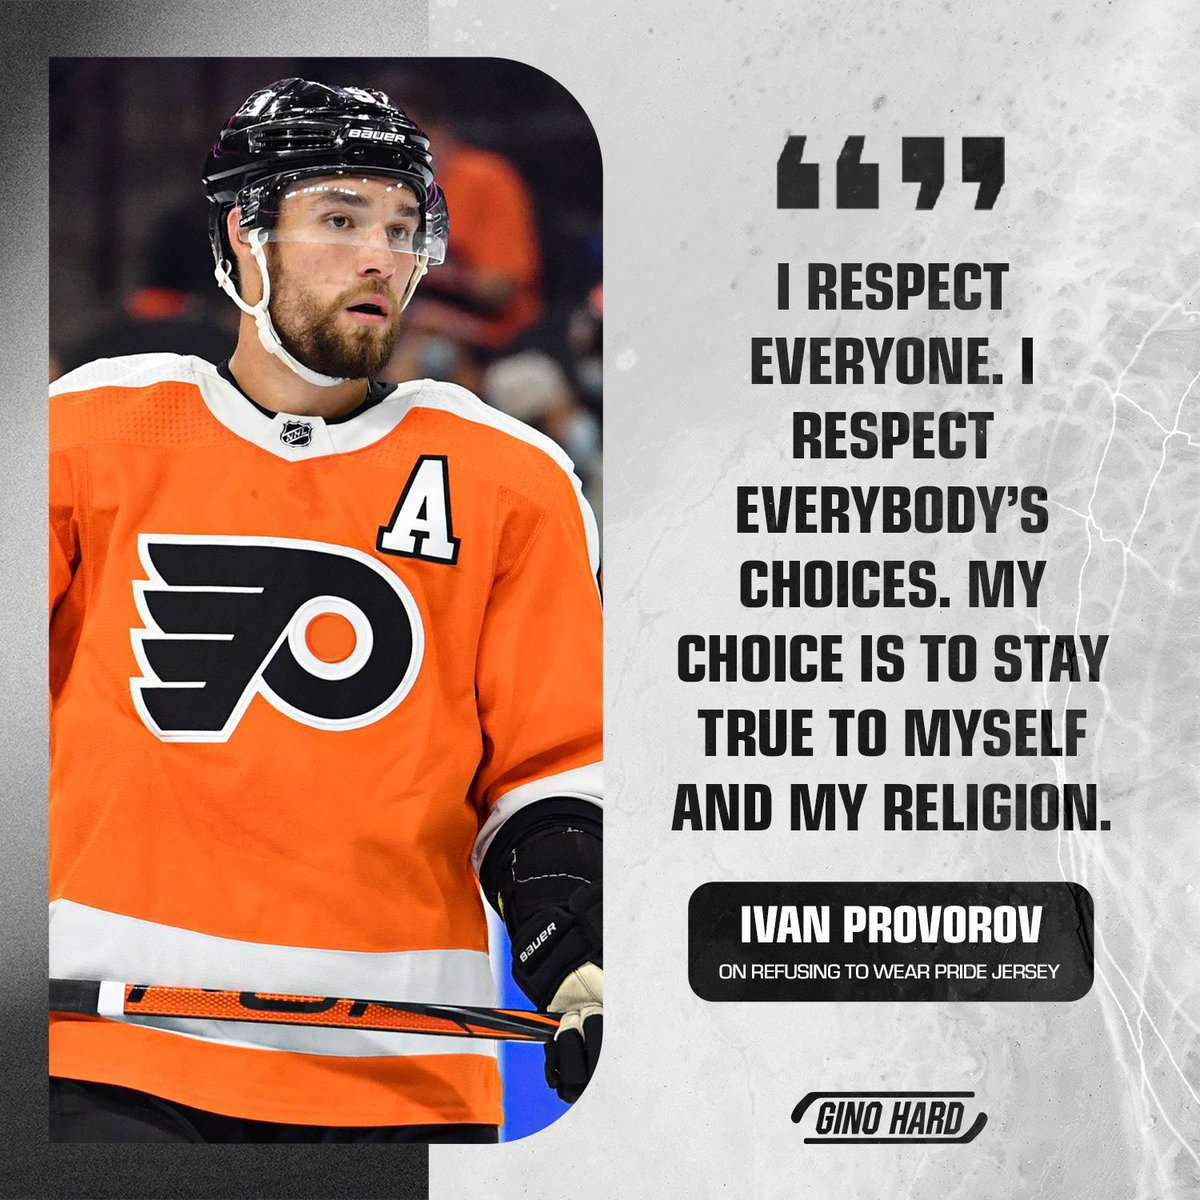 Thanks, Ivan Provorov, for giving us a reason to keep fighting